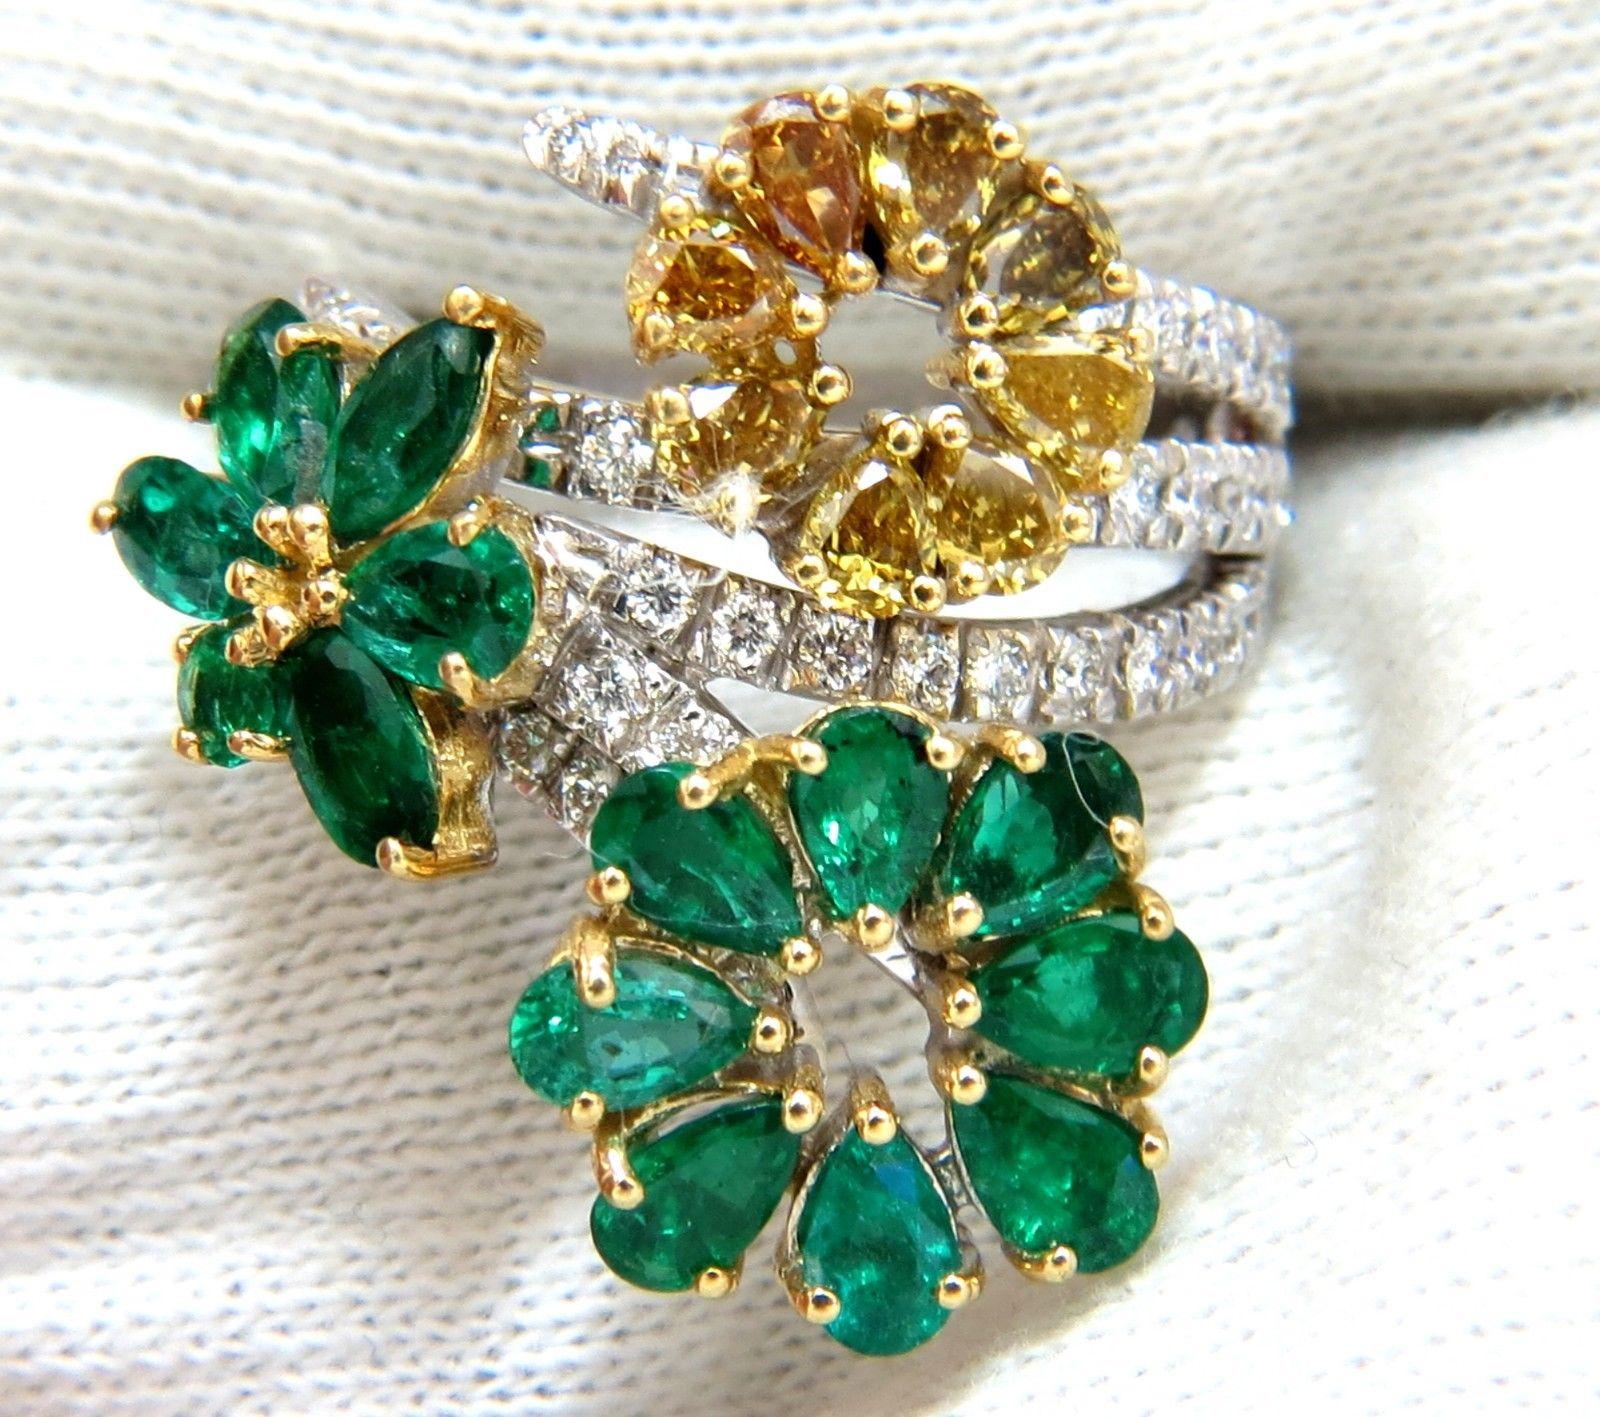 Cluster Cocktail Greens

2.60ct. Natural Emeralds cocktail Ring

Pear, Marquise & Round Cuts

Transparent / clean clarity

Vivid Greens 



1.06ct. Fancy Yellow Brown Diamonds.

Pear Shaped & full cuts 

 Vs-2 clarity.  

.70ct side round diamond